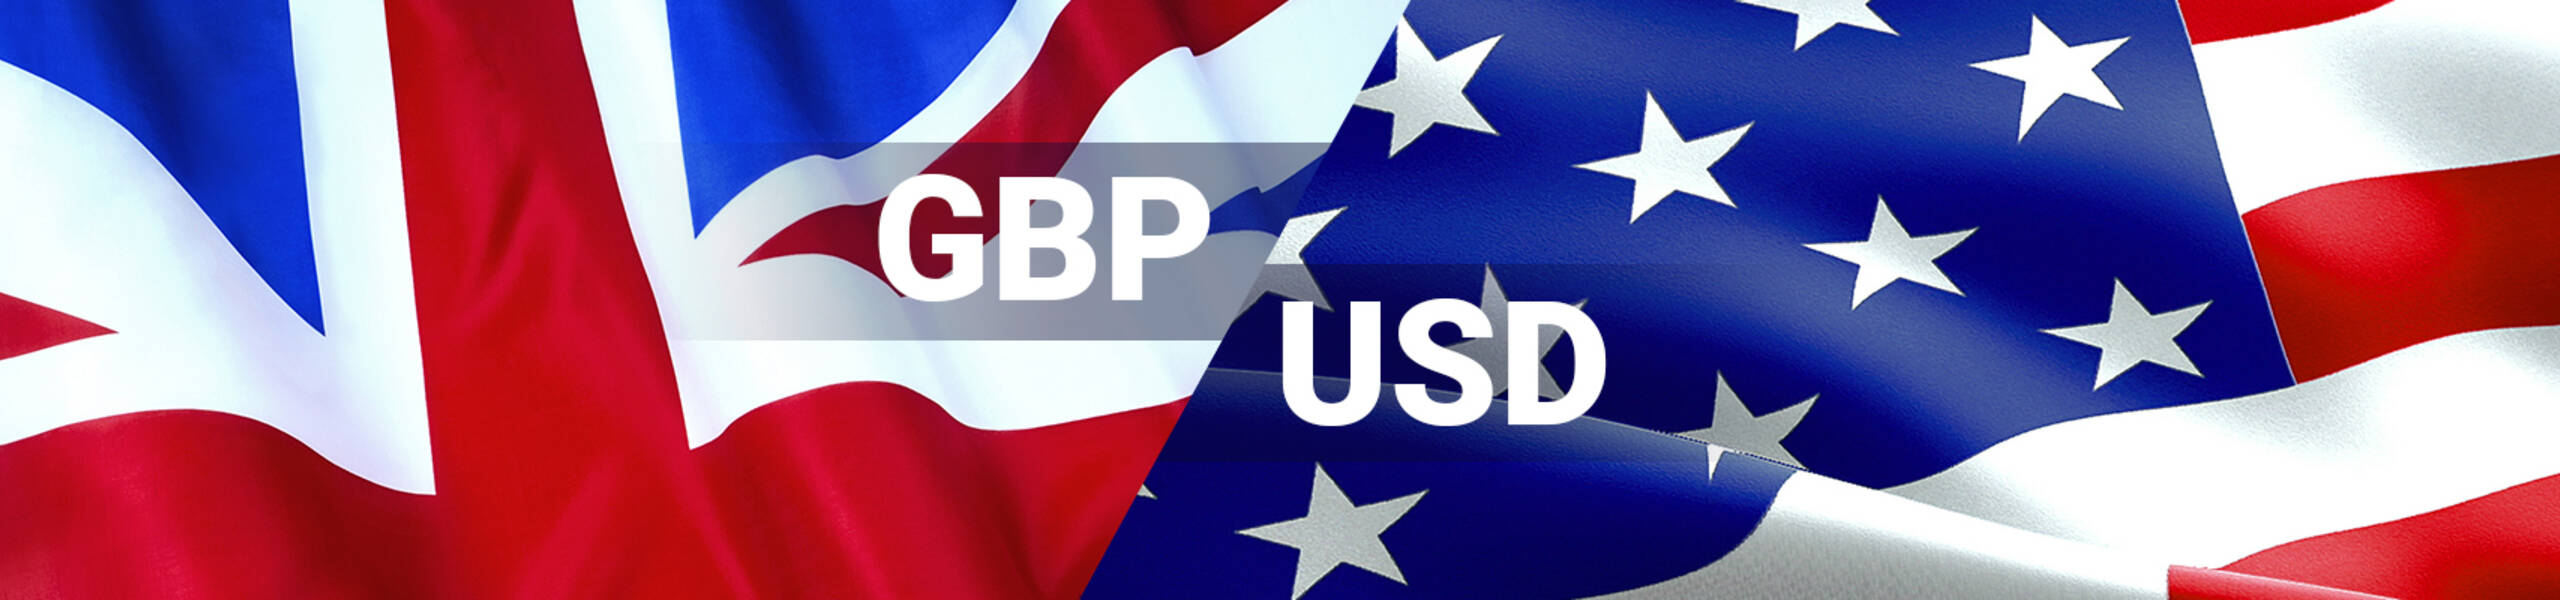 GBP/USD: pound cannot get home